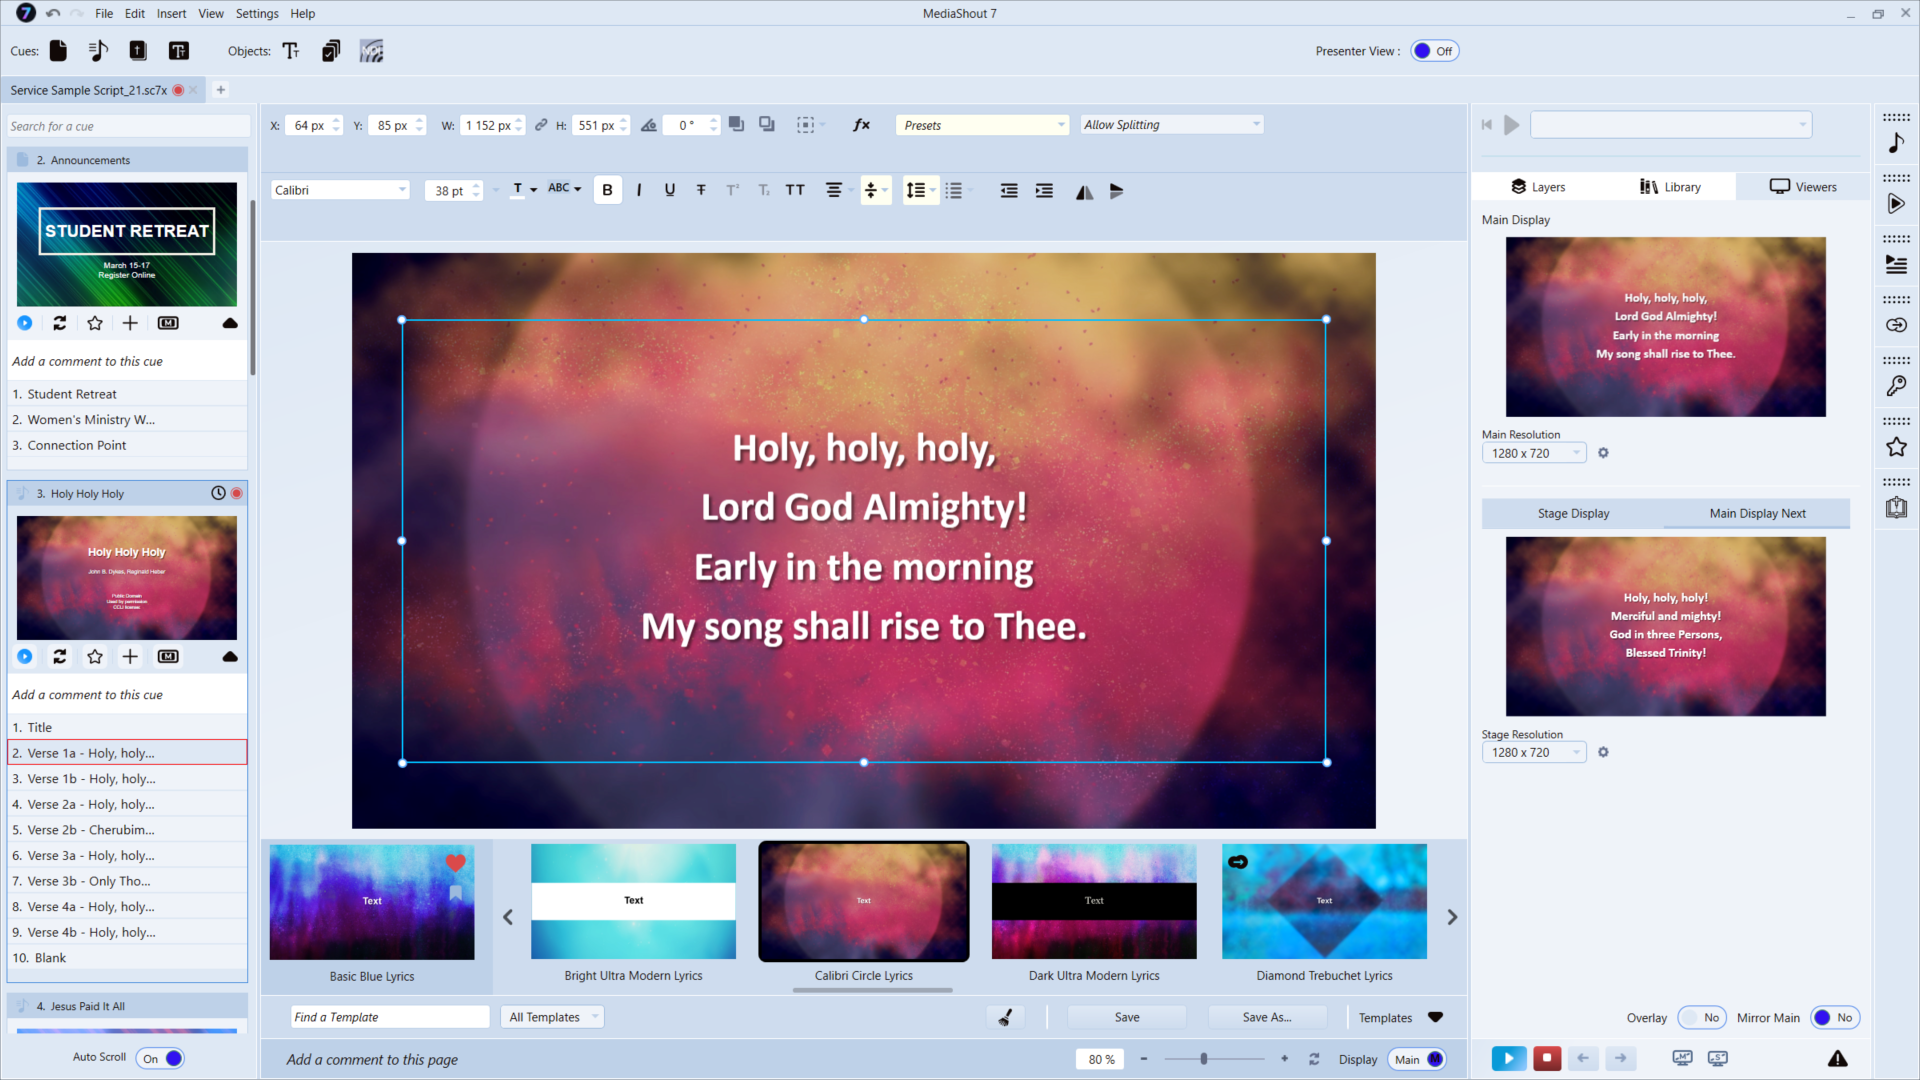 the best presentation software for churches